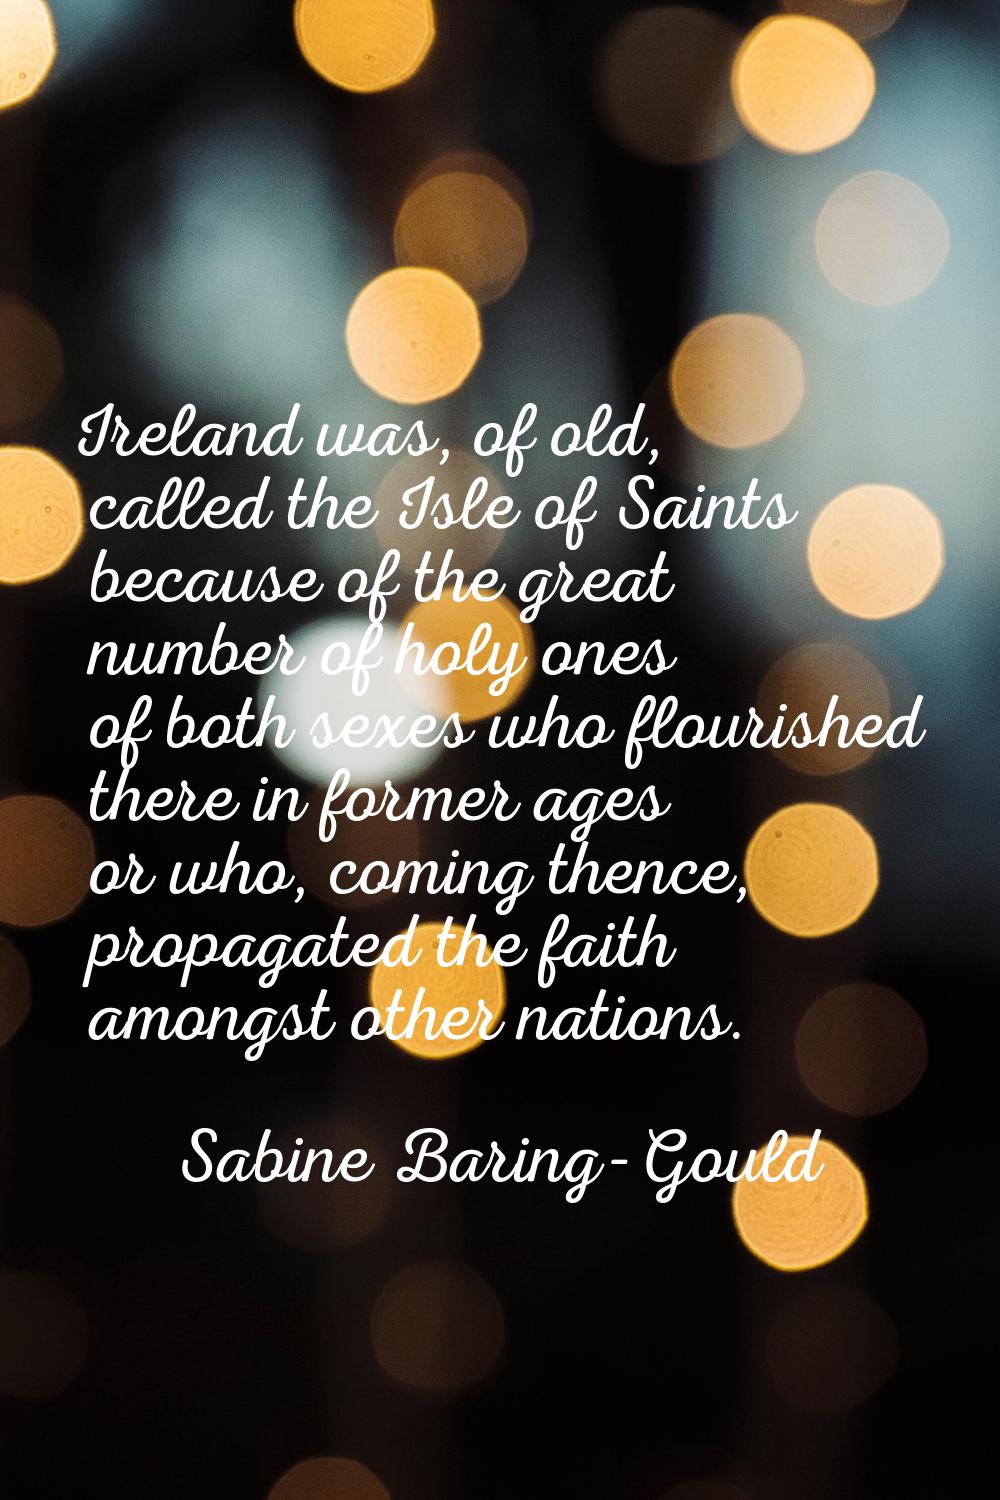 Ireland was, of old, called the Isle of Saints because of the great number of holy ones of both sex